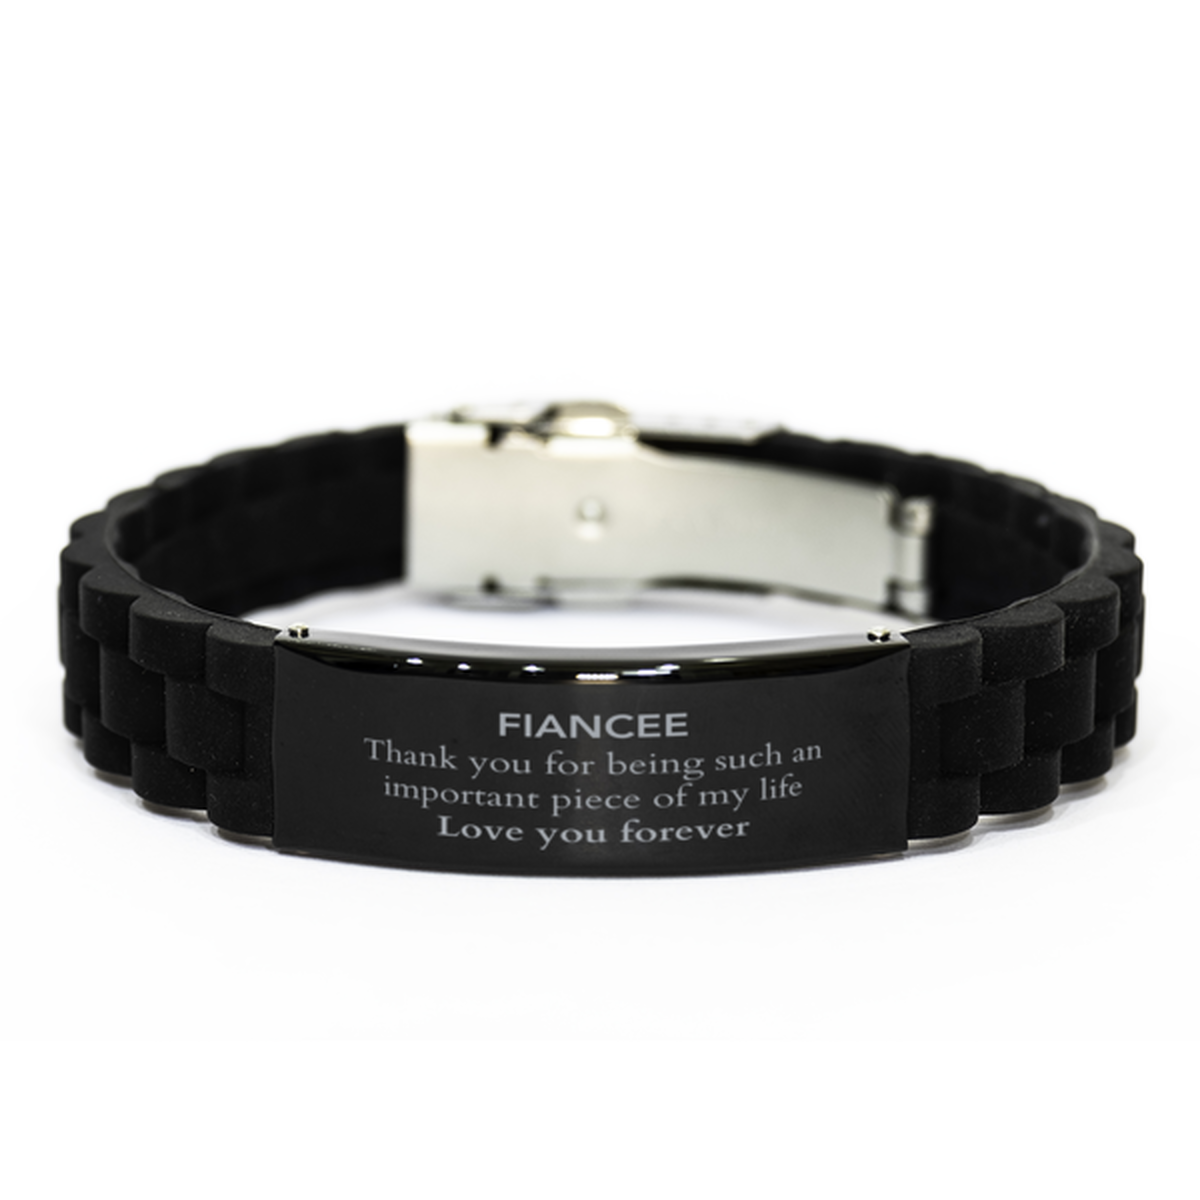 Appropriate Fiancee Black Glidelock Clasp Bracelet Epic Birthday Gifts for Fiancee Thank you for being such an important piece of my life Fiancee Christmas Mothers Fathers Day